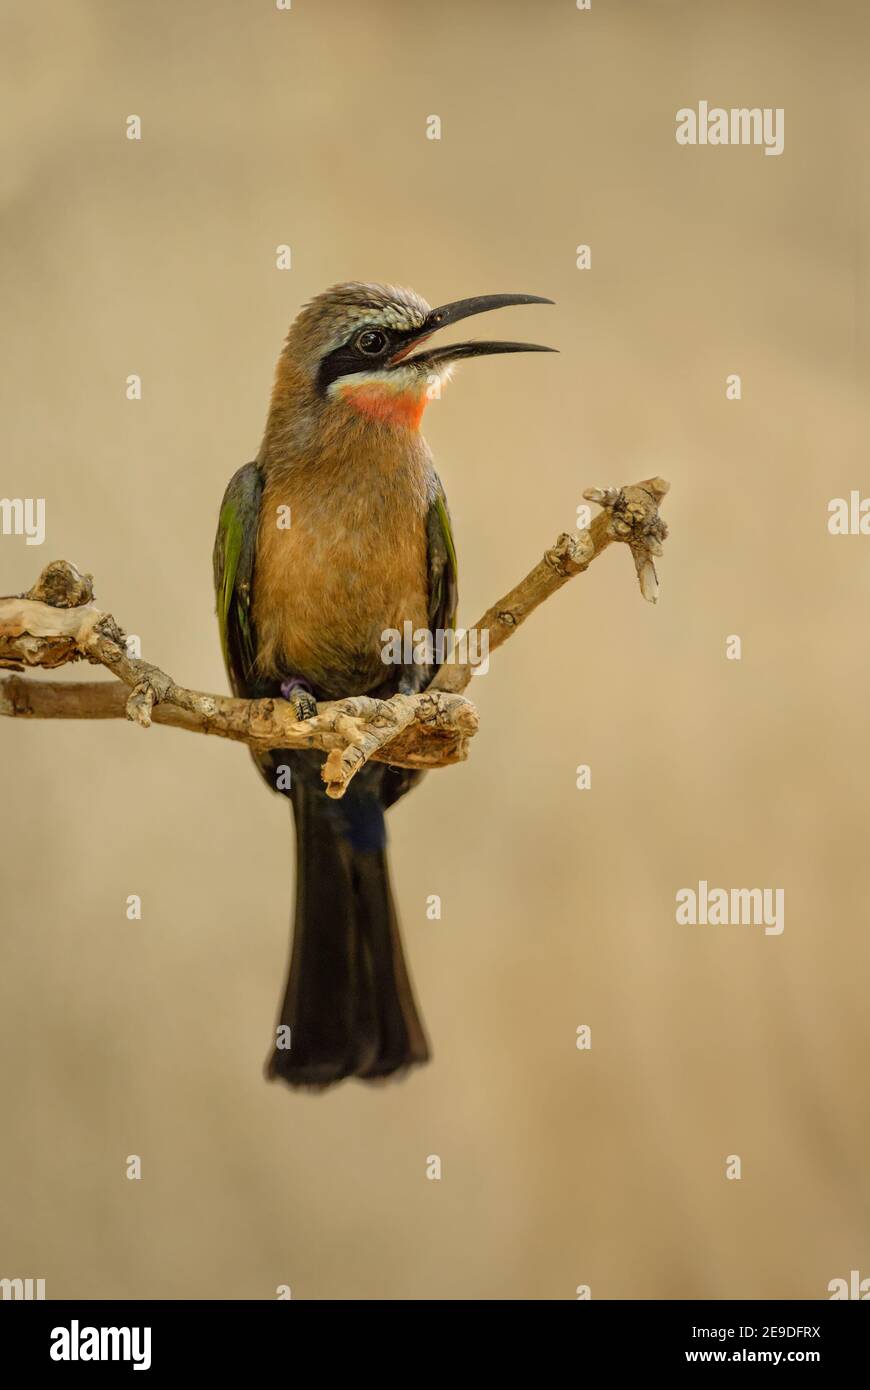 White-fronted Bee-eater - Merops bullockoides, beautiful colored bird from African savannas and bushes, Namibia. Stock Photo